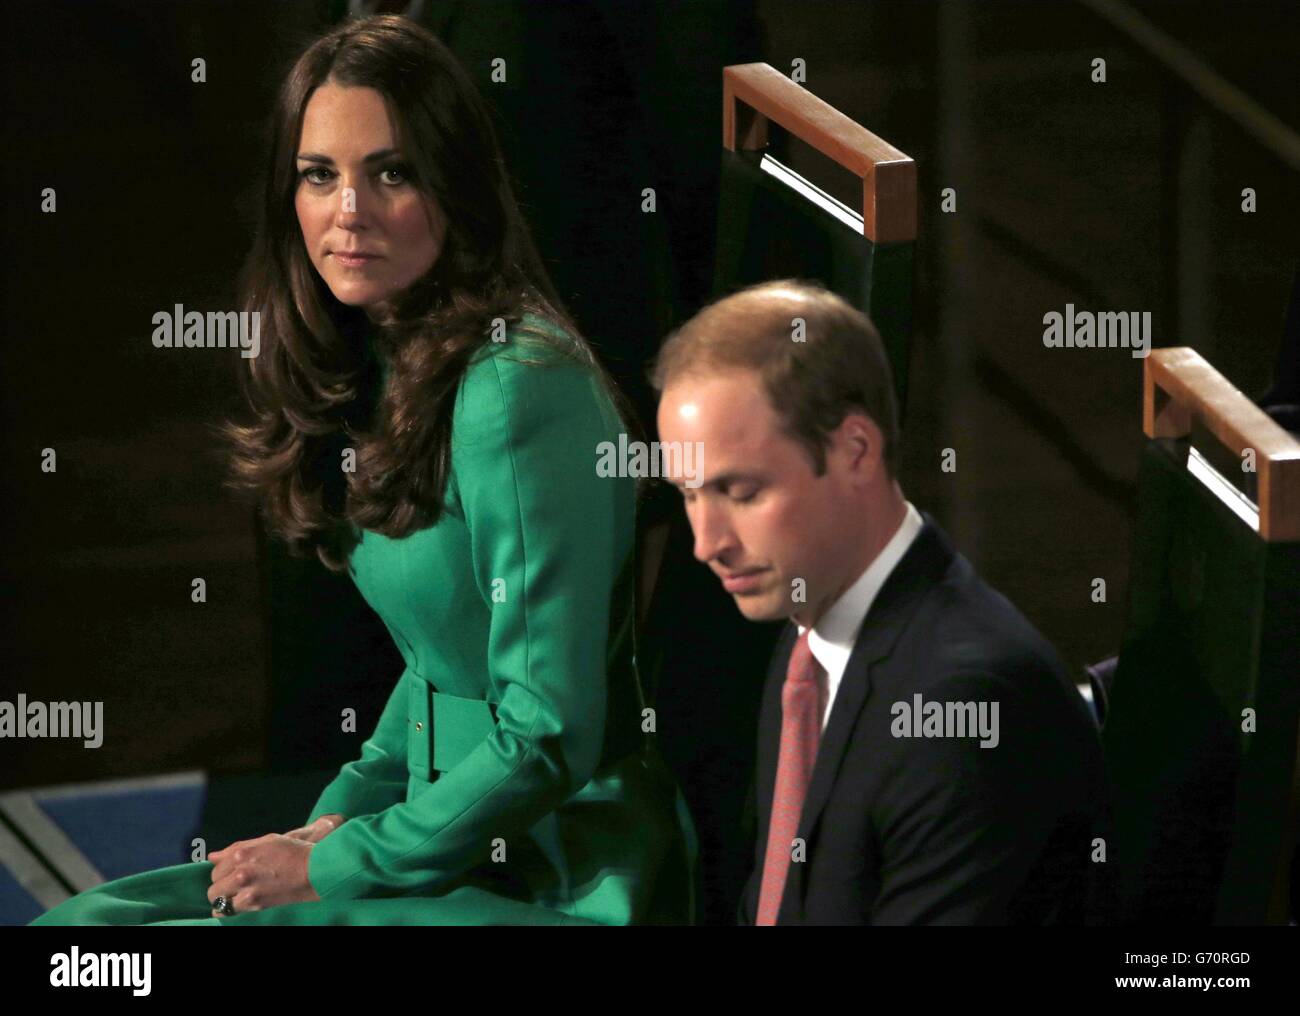 The Duchess of Cambridge, sits next to the Duke of Cambridge in the Great Hall at Parliament House in Canberra. The royal couple are on a 19-day official visit to New Zealand and Australia with their son George. Stock Photo